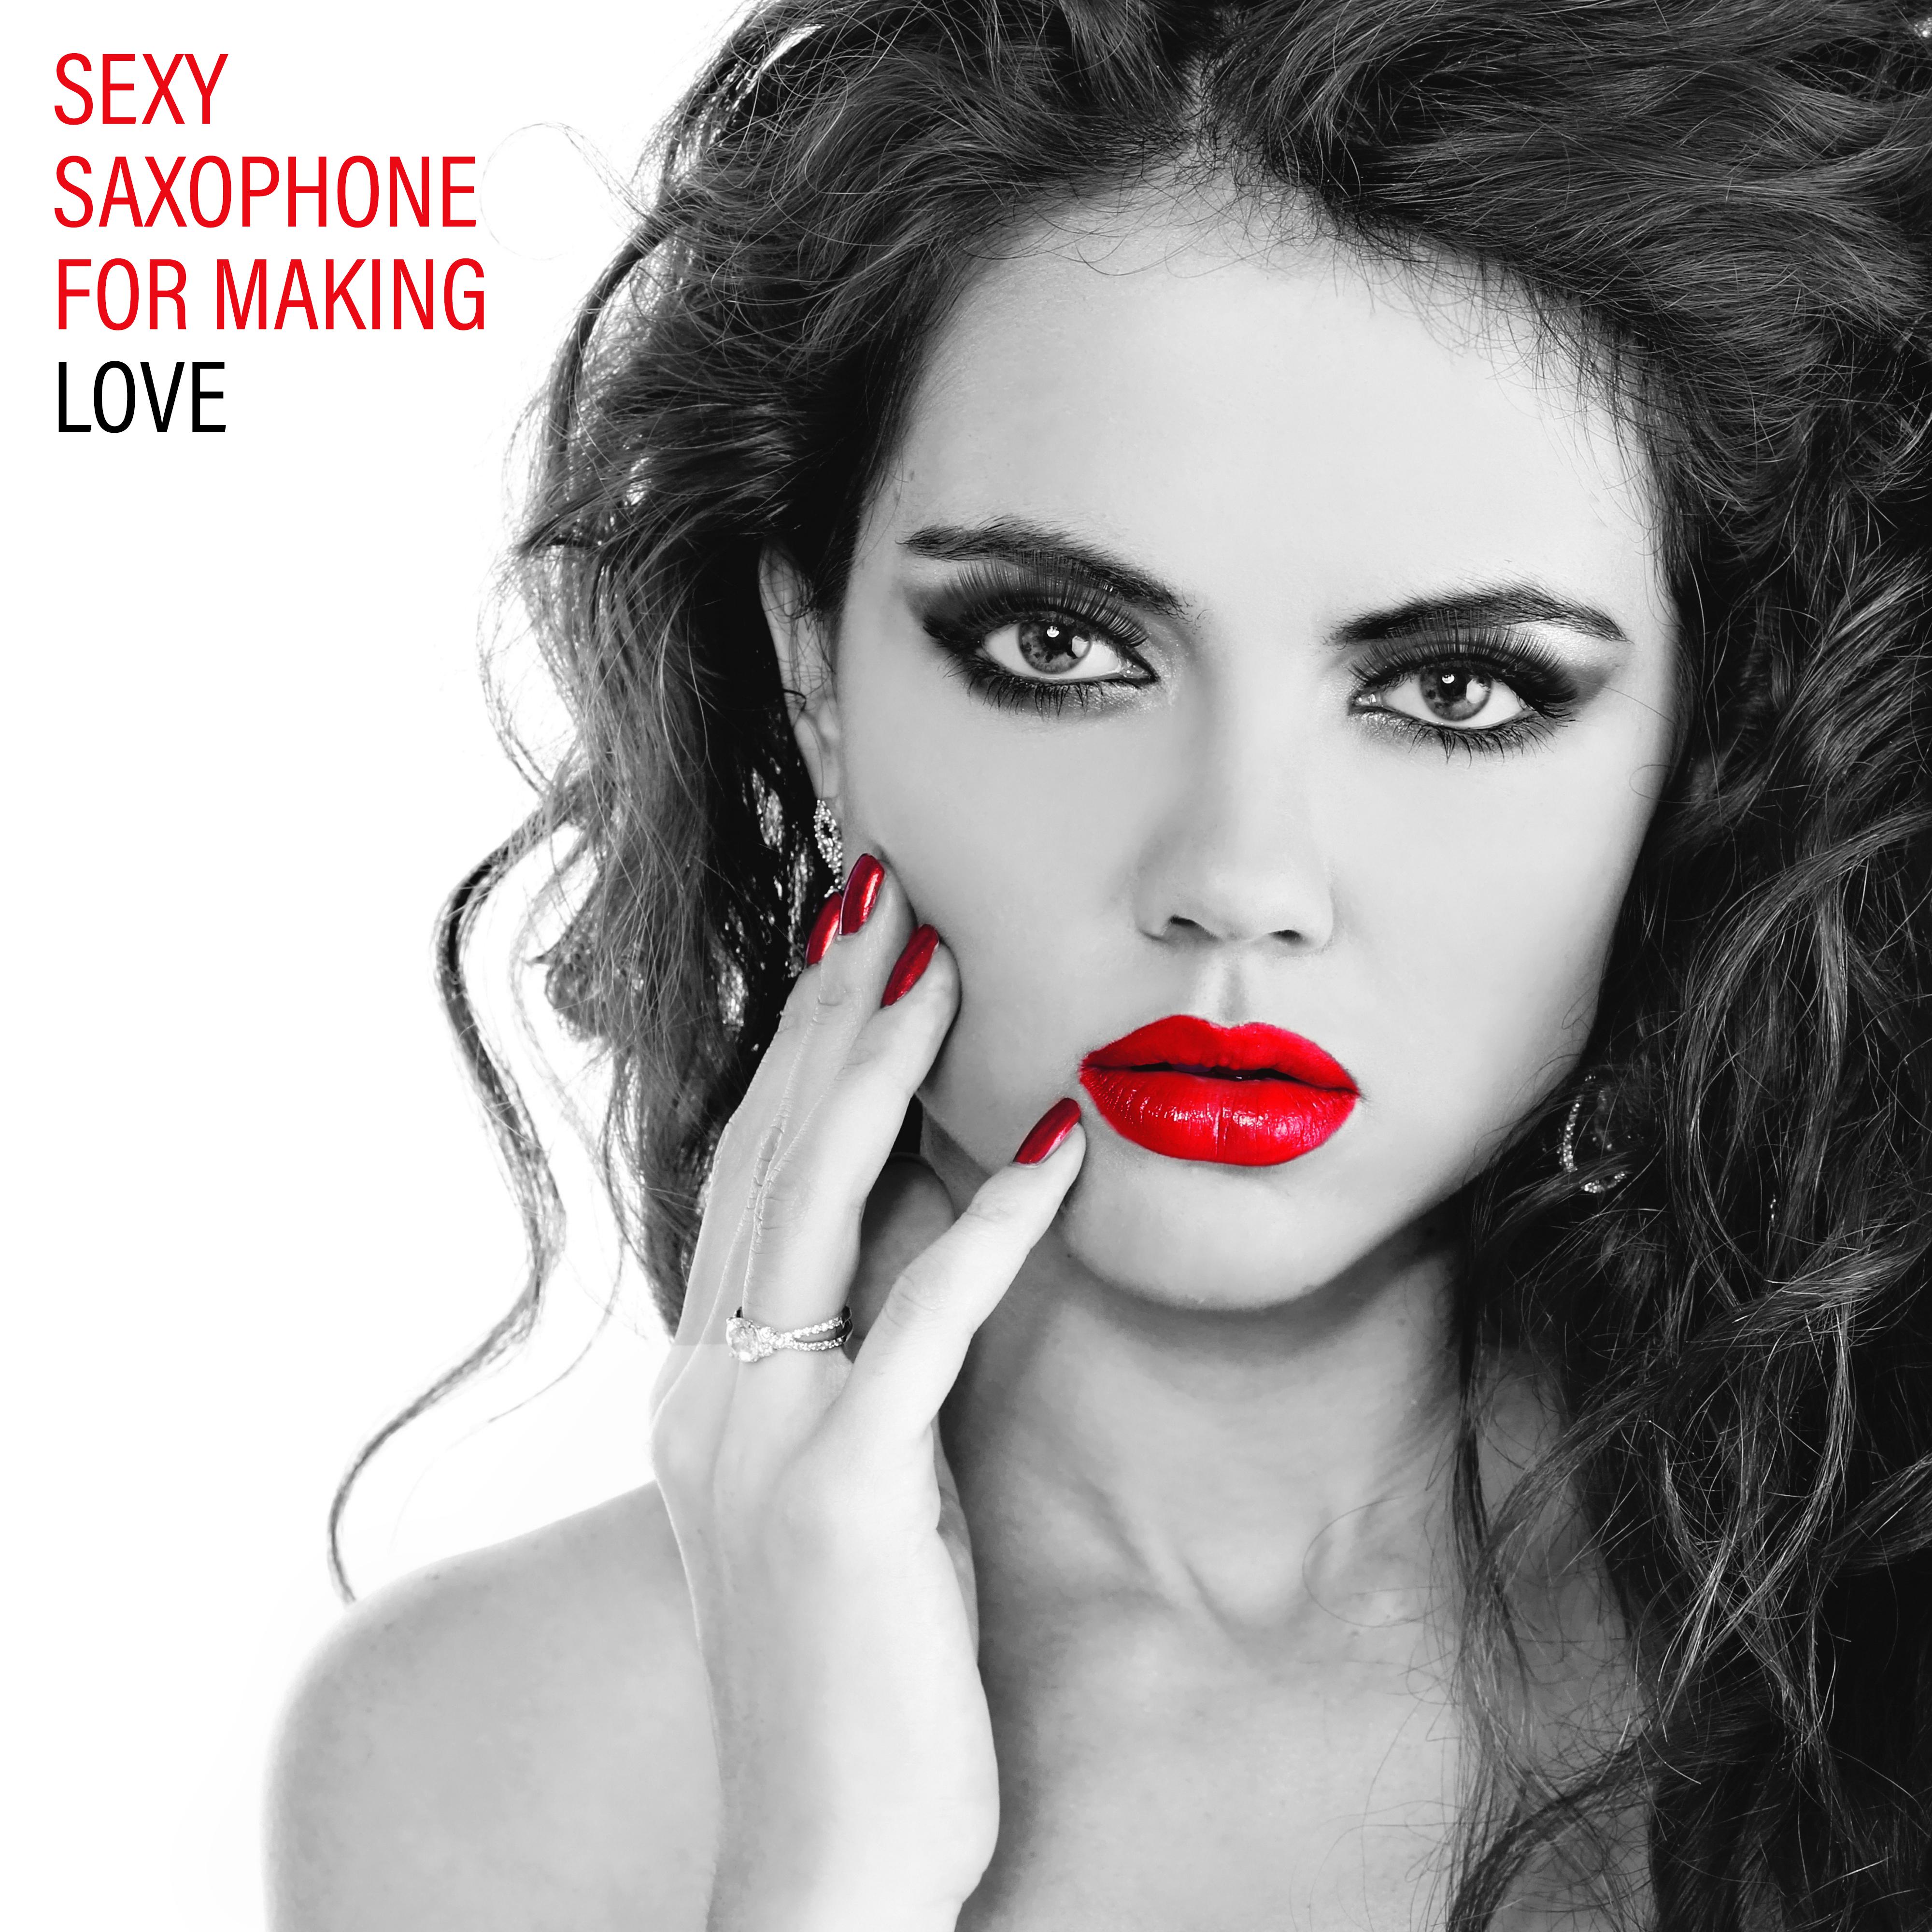 **** Saxophone for Making Love – Erotic Sounds for ***, Jazz Relaxation, *** Music, Instrumental Jazz Music Ambient, Romantic Music at Night